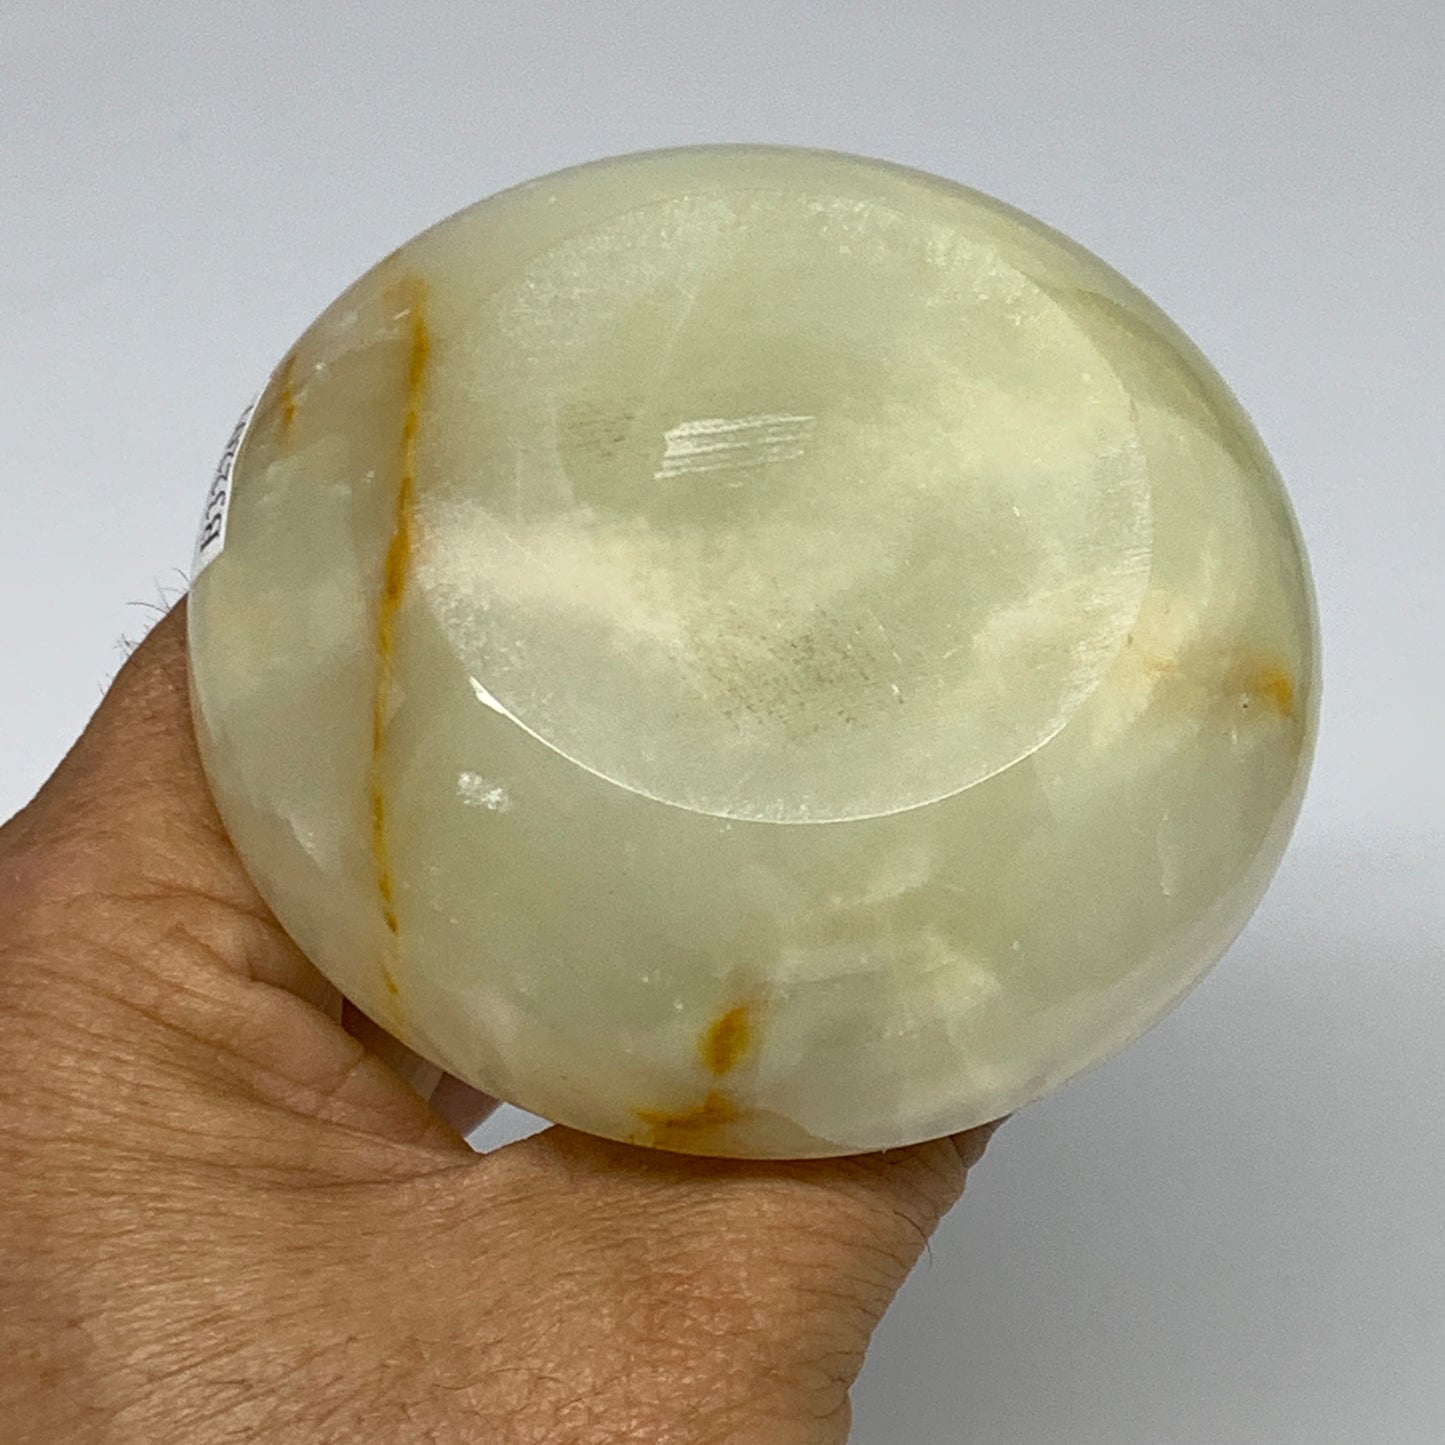 178g, 2.6"x1.4"x2.9", Natural Green Onyx Candle Holder Gemstone Hand Carved, B32